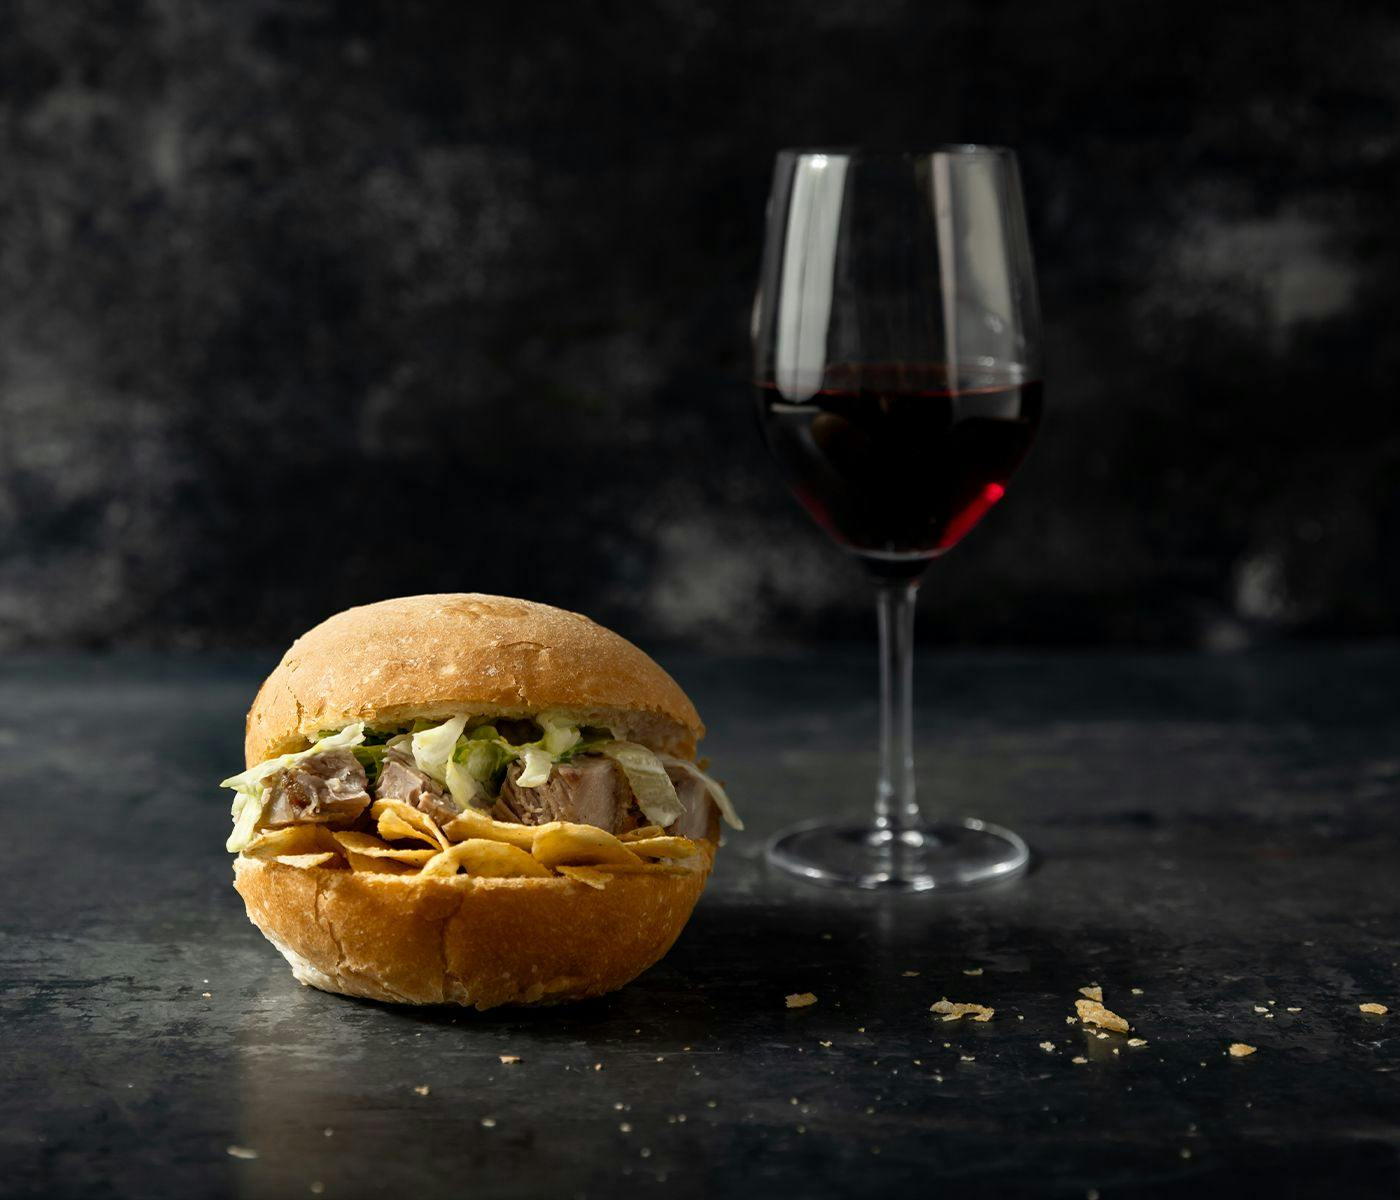 A pork bun with a glass of red wine.